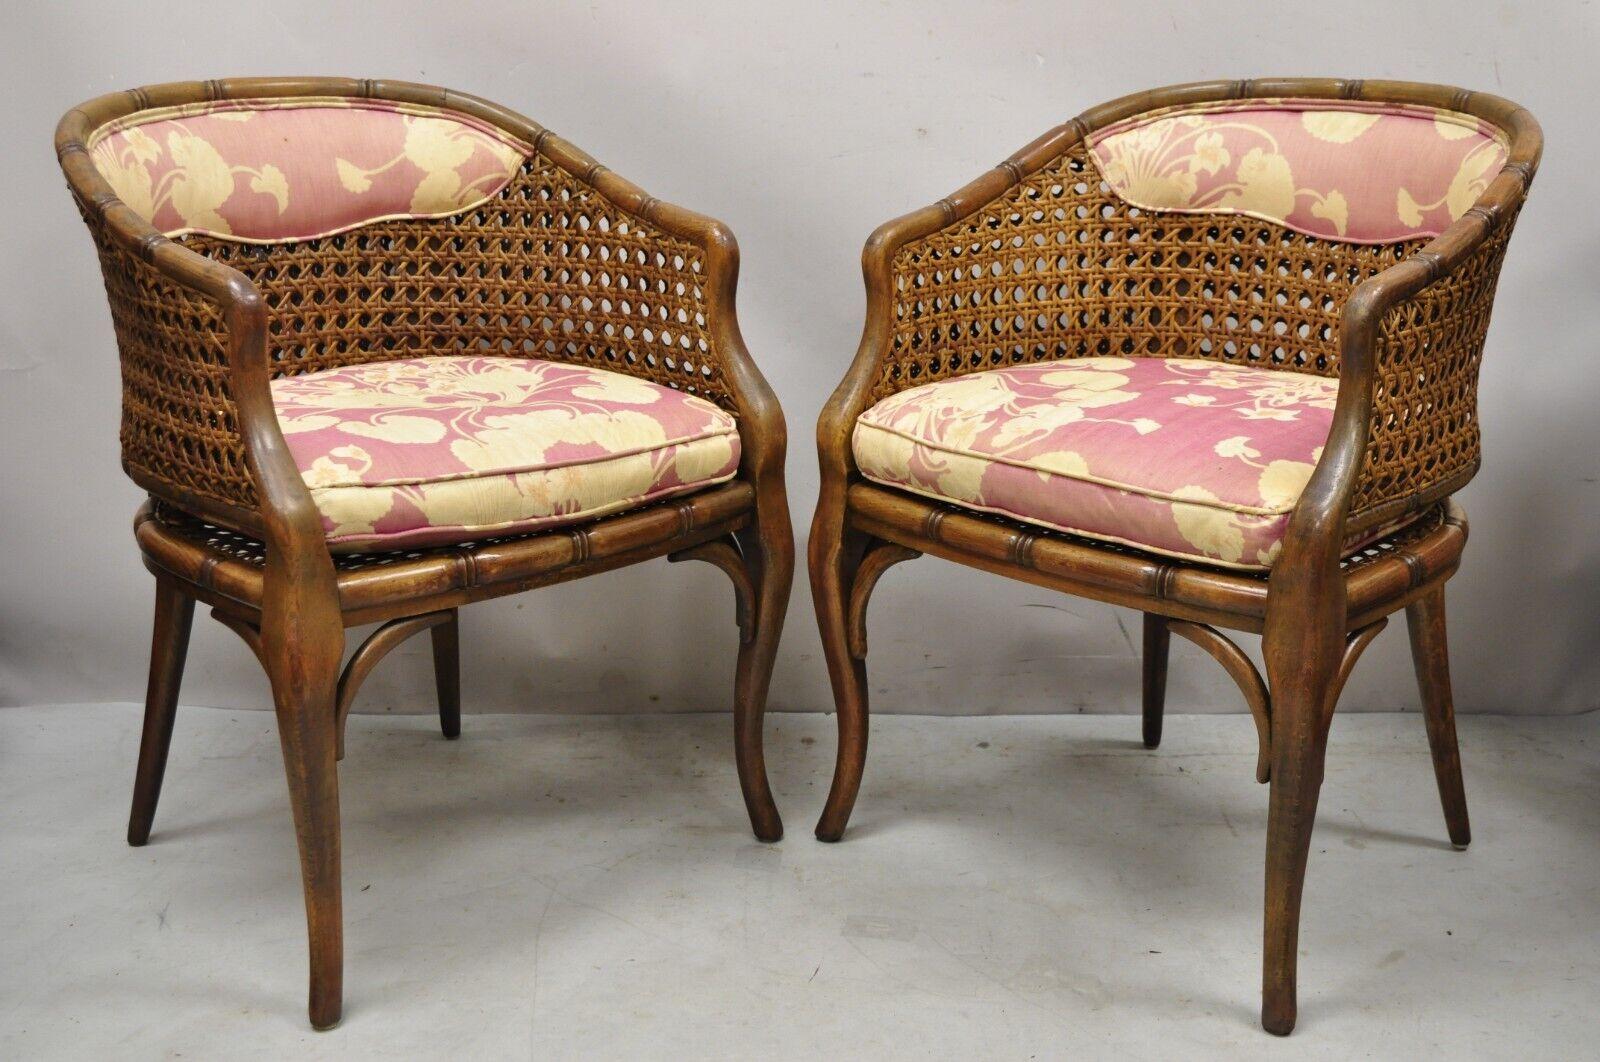 Pair of Vintage Hollywood Regency Faux bamboo cane barrel back club lounge chairs (B). Item features cane seat and back, faux bamboo carved wood frames, very nice vintage pair, great style and form. Circa Mid 20th Century. Measurements: 31